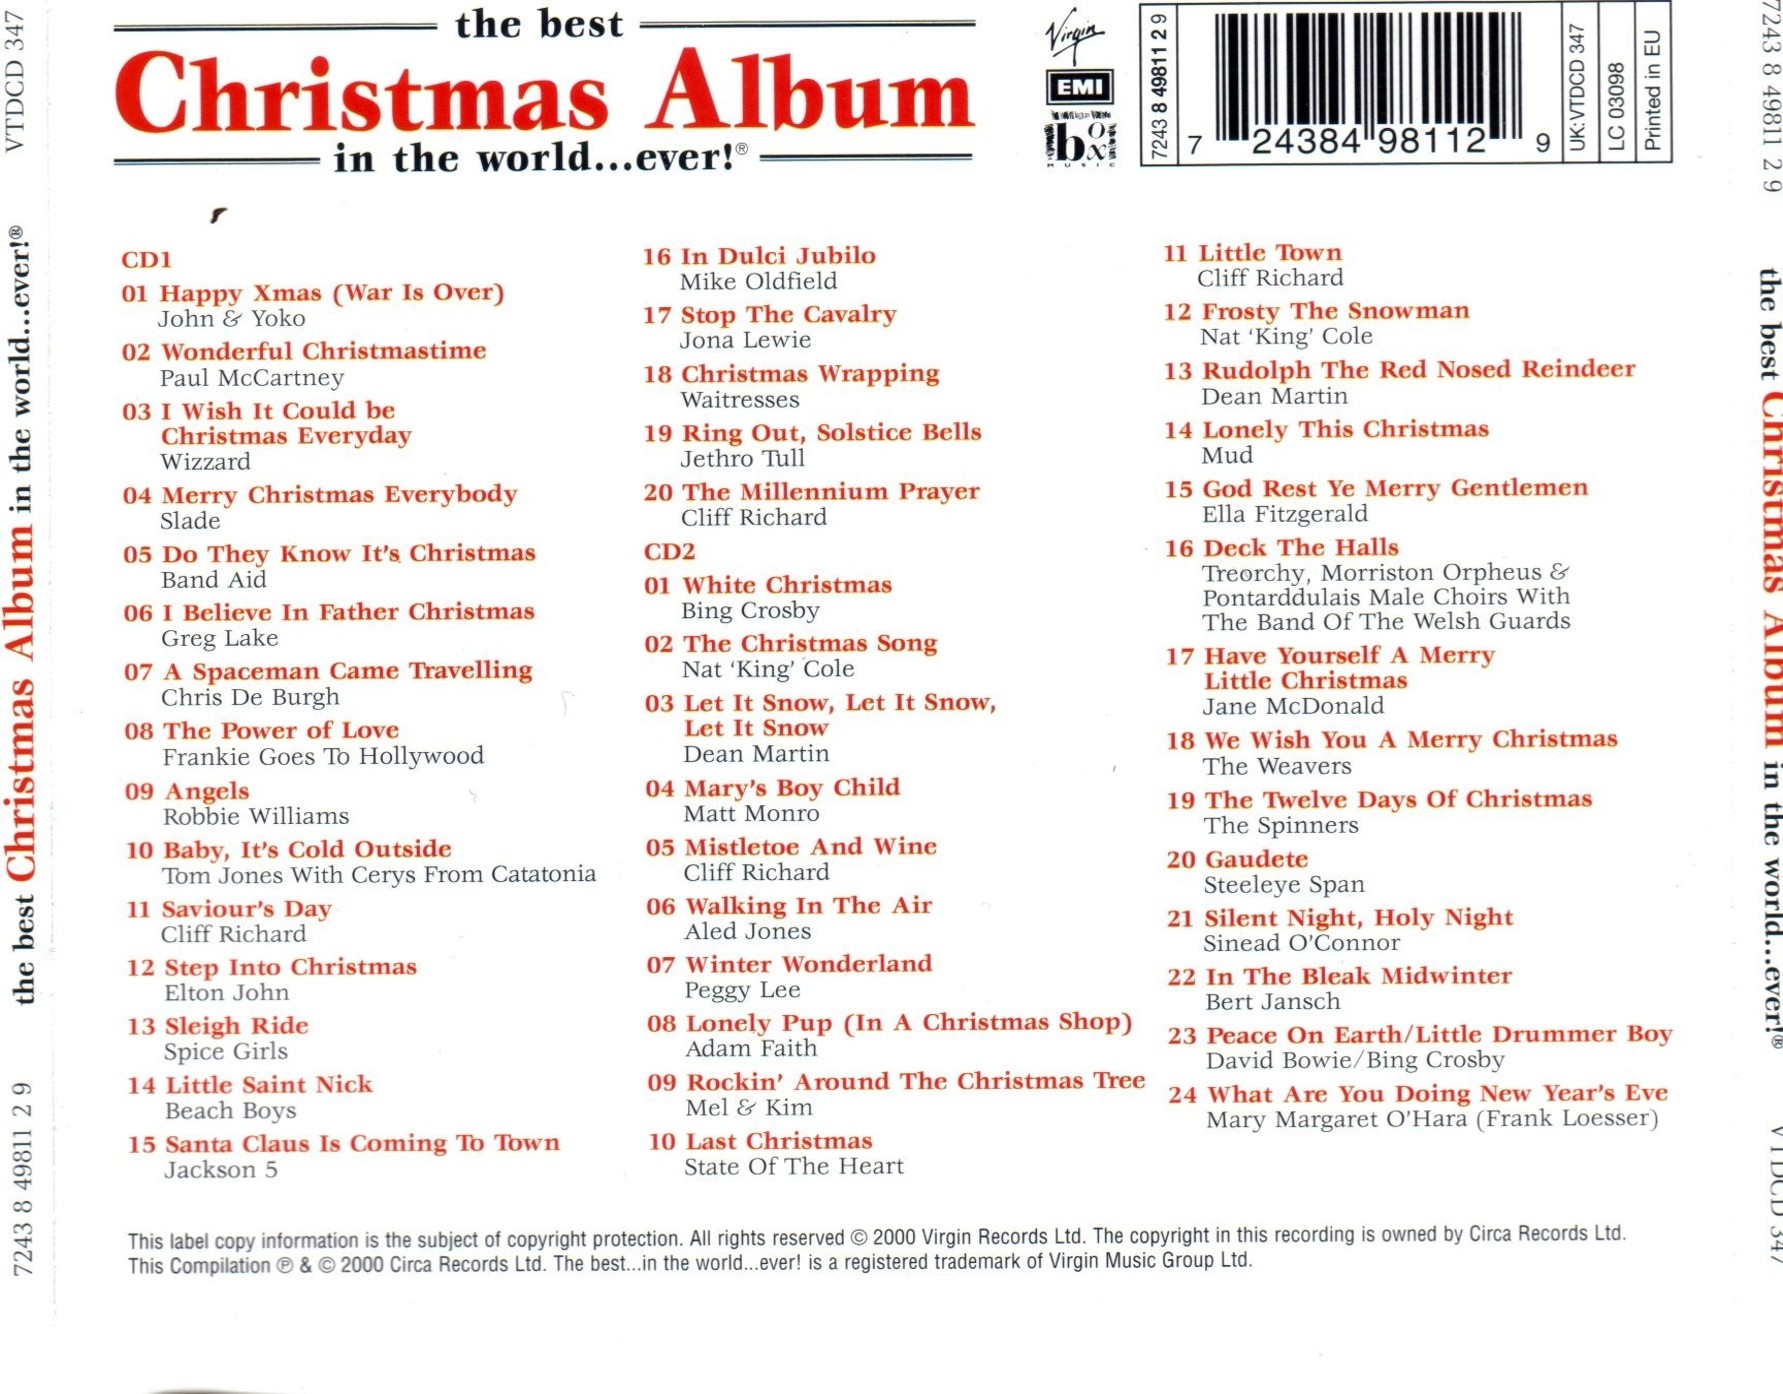 The Best Christma... - Various Artists - The Best Christmas Album In The World Ever - Back.jpg